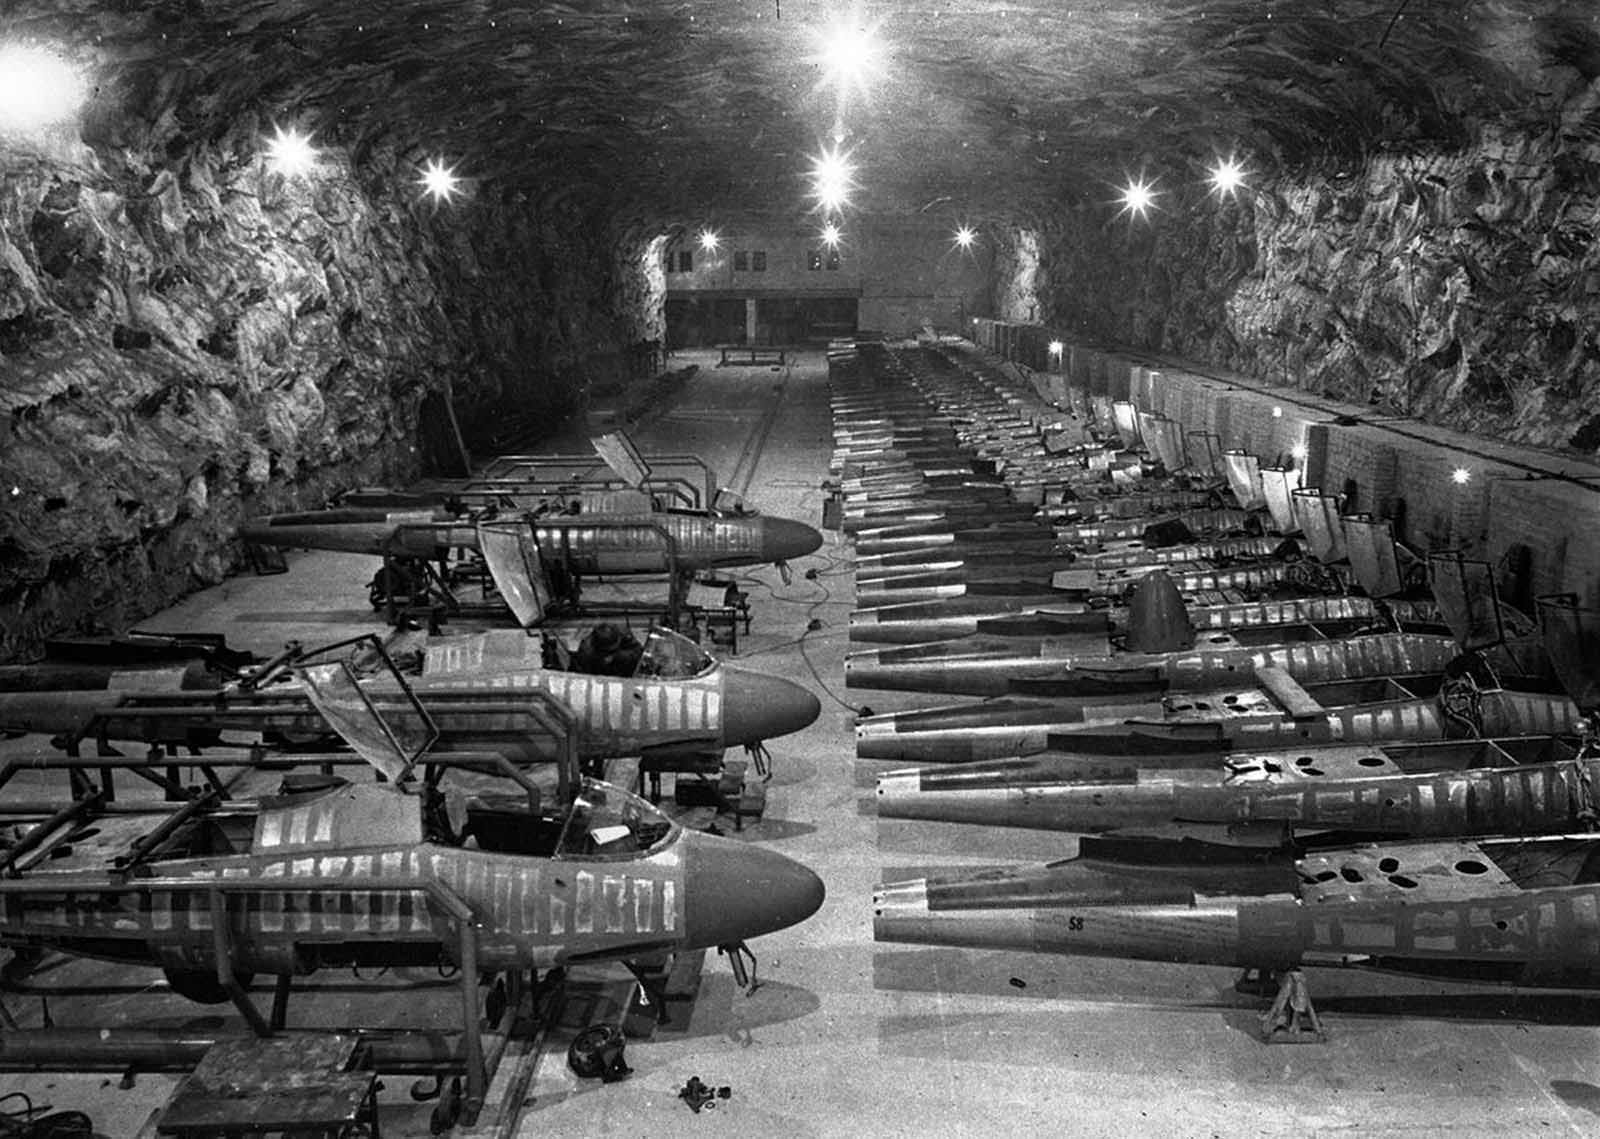 Partly completed Heinkel He-162 fighter jets sit on the assembly line in the underground Junkers factory at Tarthun, Germany, in early April 1945. The huge underground galleries, in a former salt mine, were discovered by the 1st U.S. Army during their advance on Magdeburg.